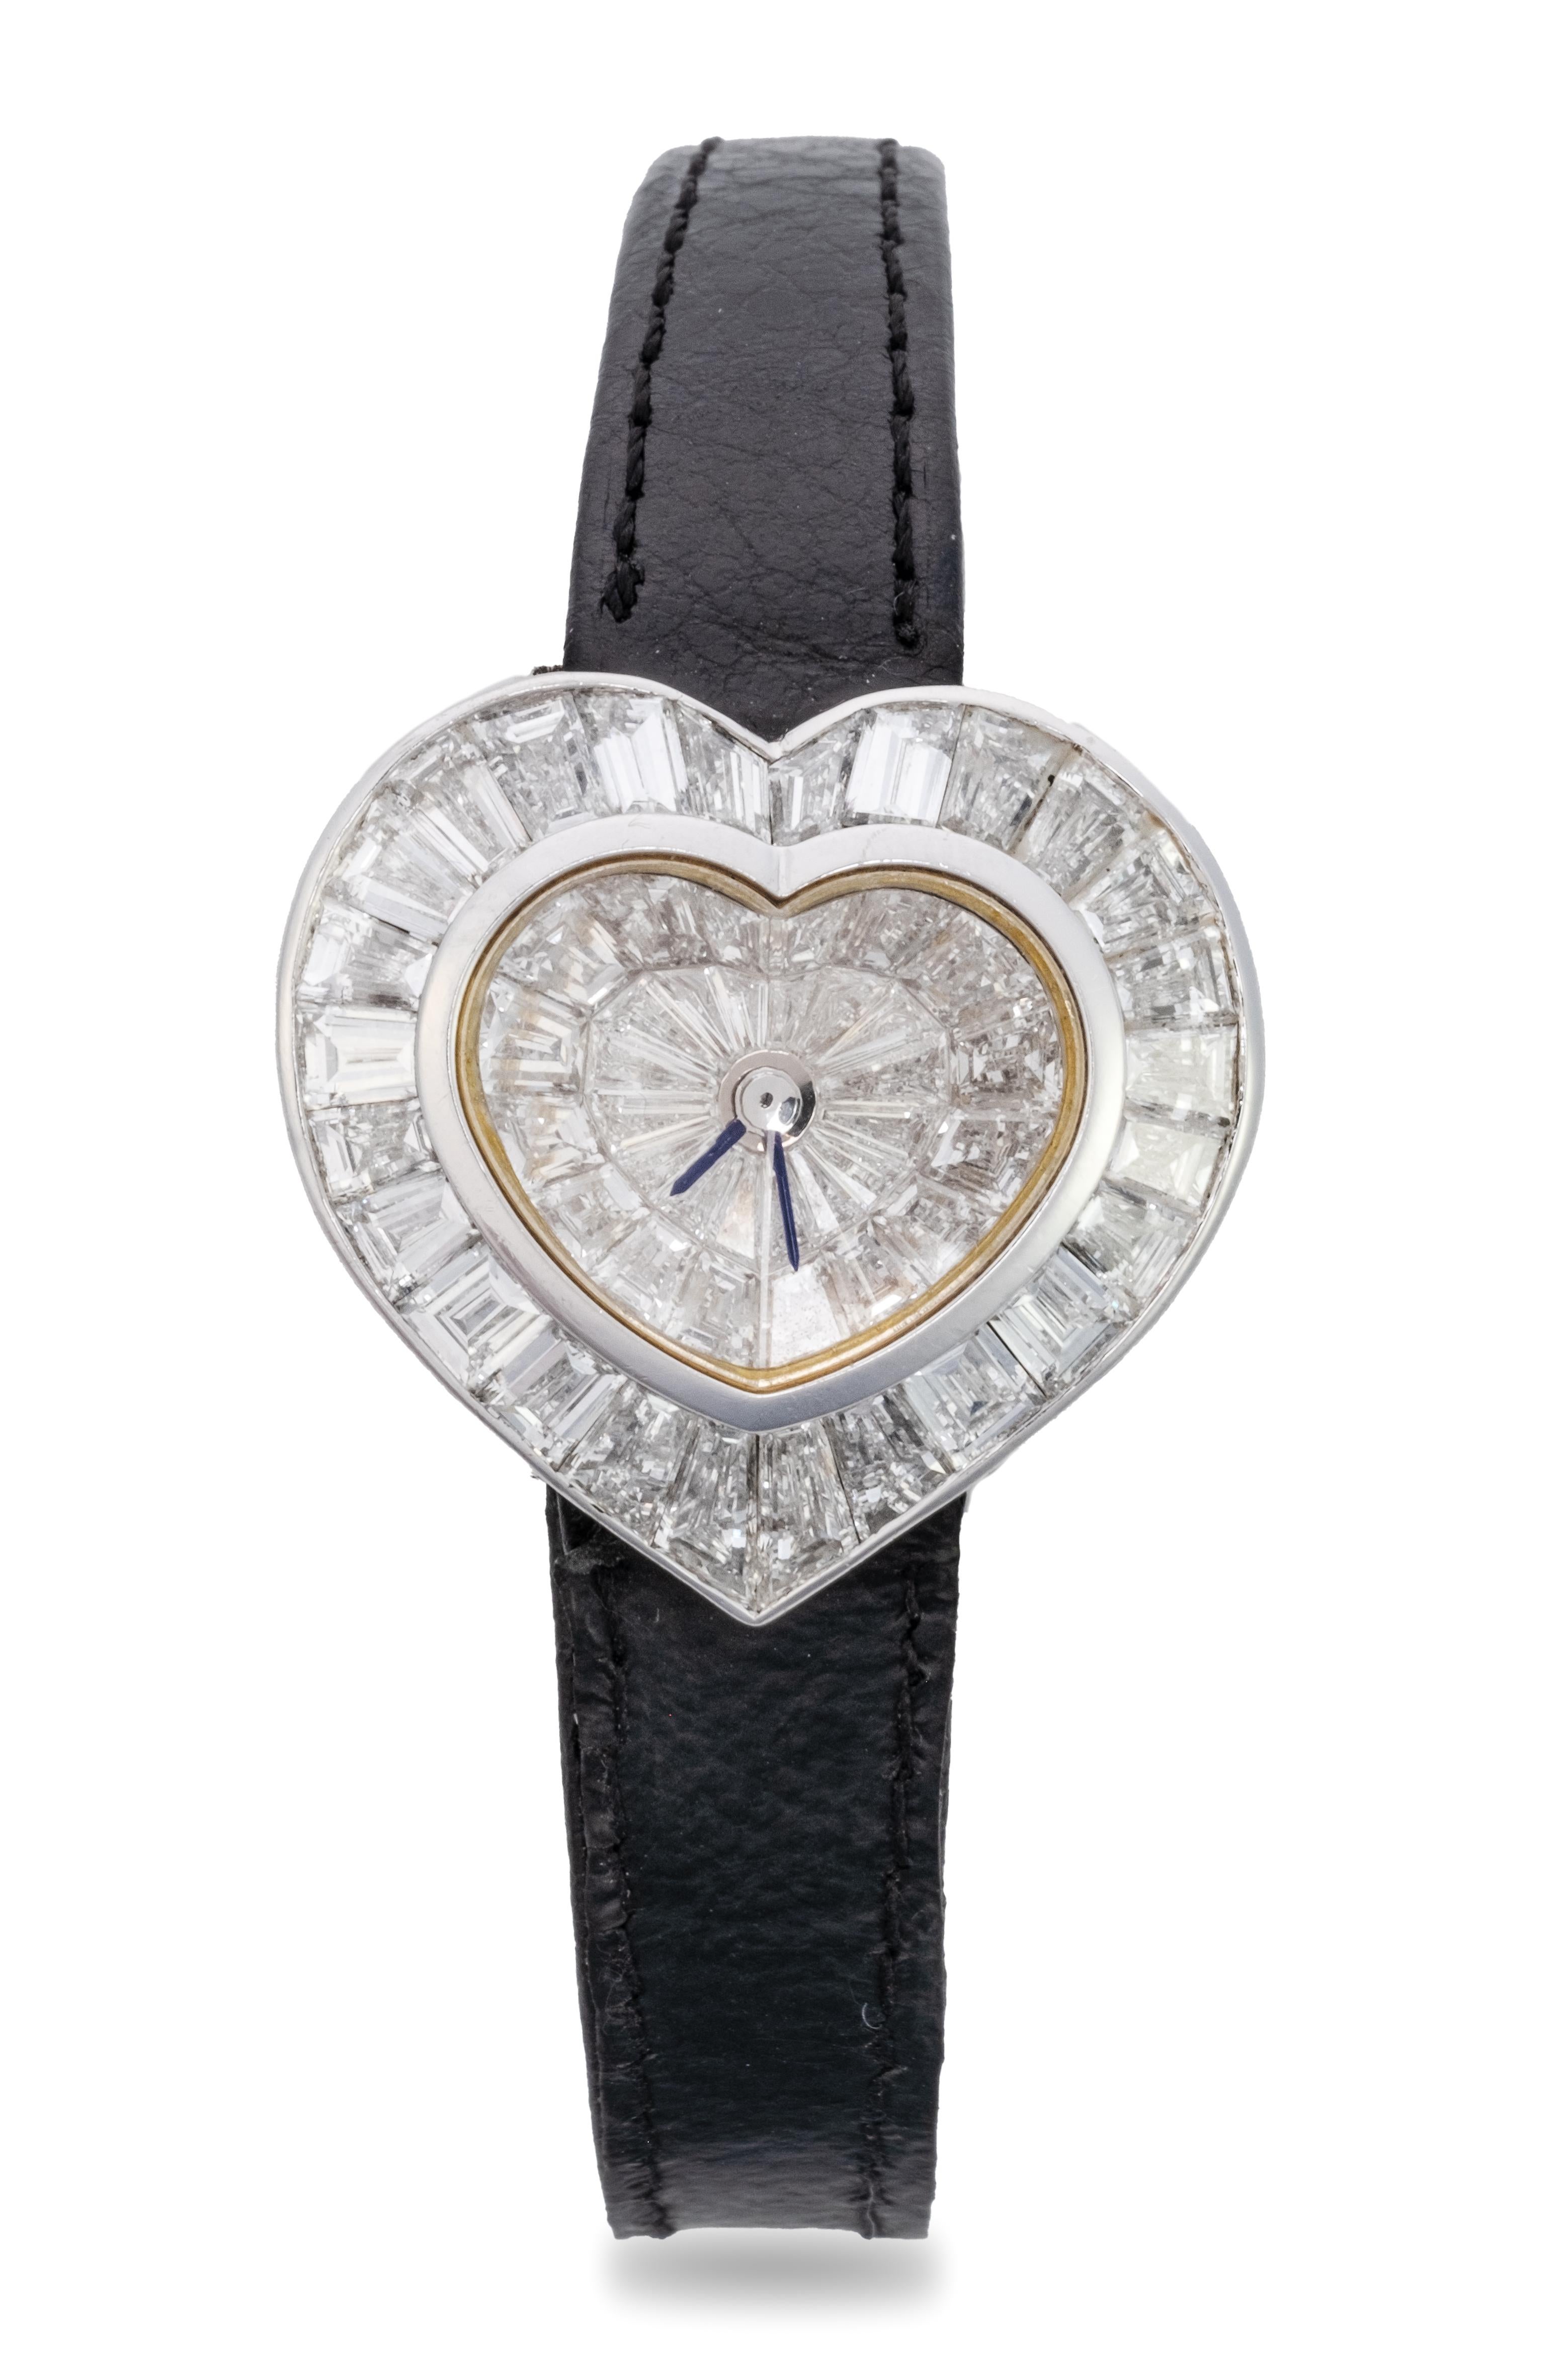 The amazing heart inside of heart-shaped dial set with tapered baguette-cut diamonds, diamonds very approx. 7.90cts total, signed Graff, accompanied by original extra fittings including deployment clasp
28.8mm x 27.9mm approx, Strap: 8.25